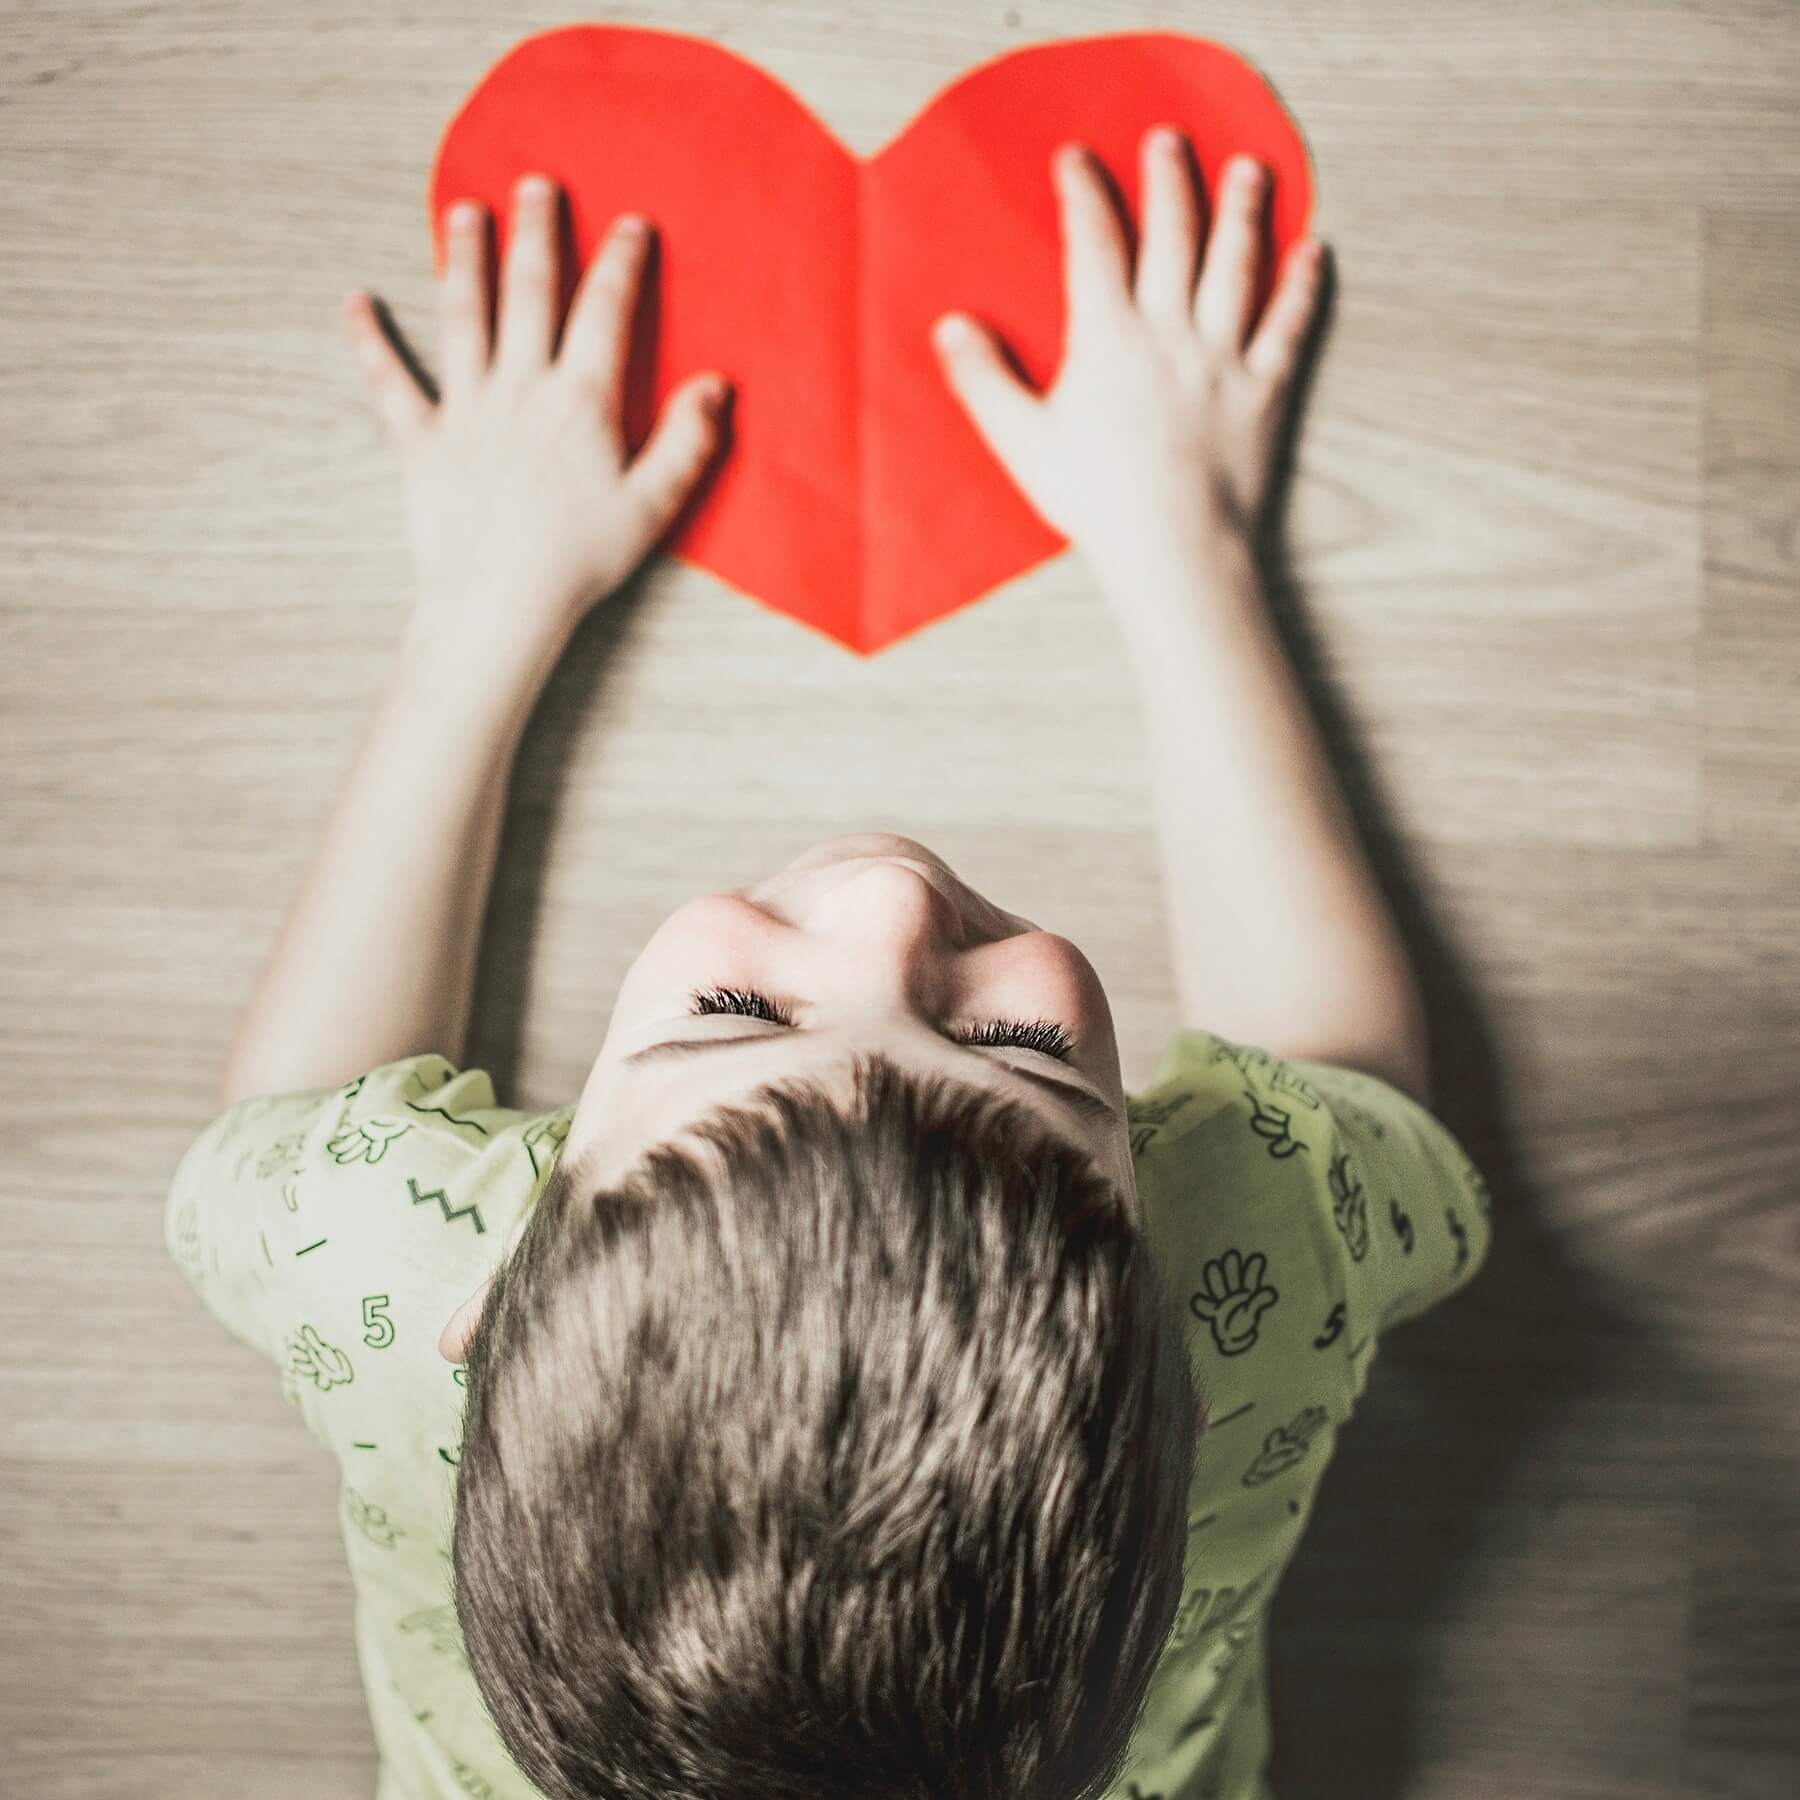 A child holding a paper heart